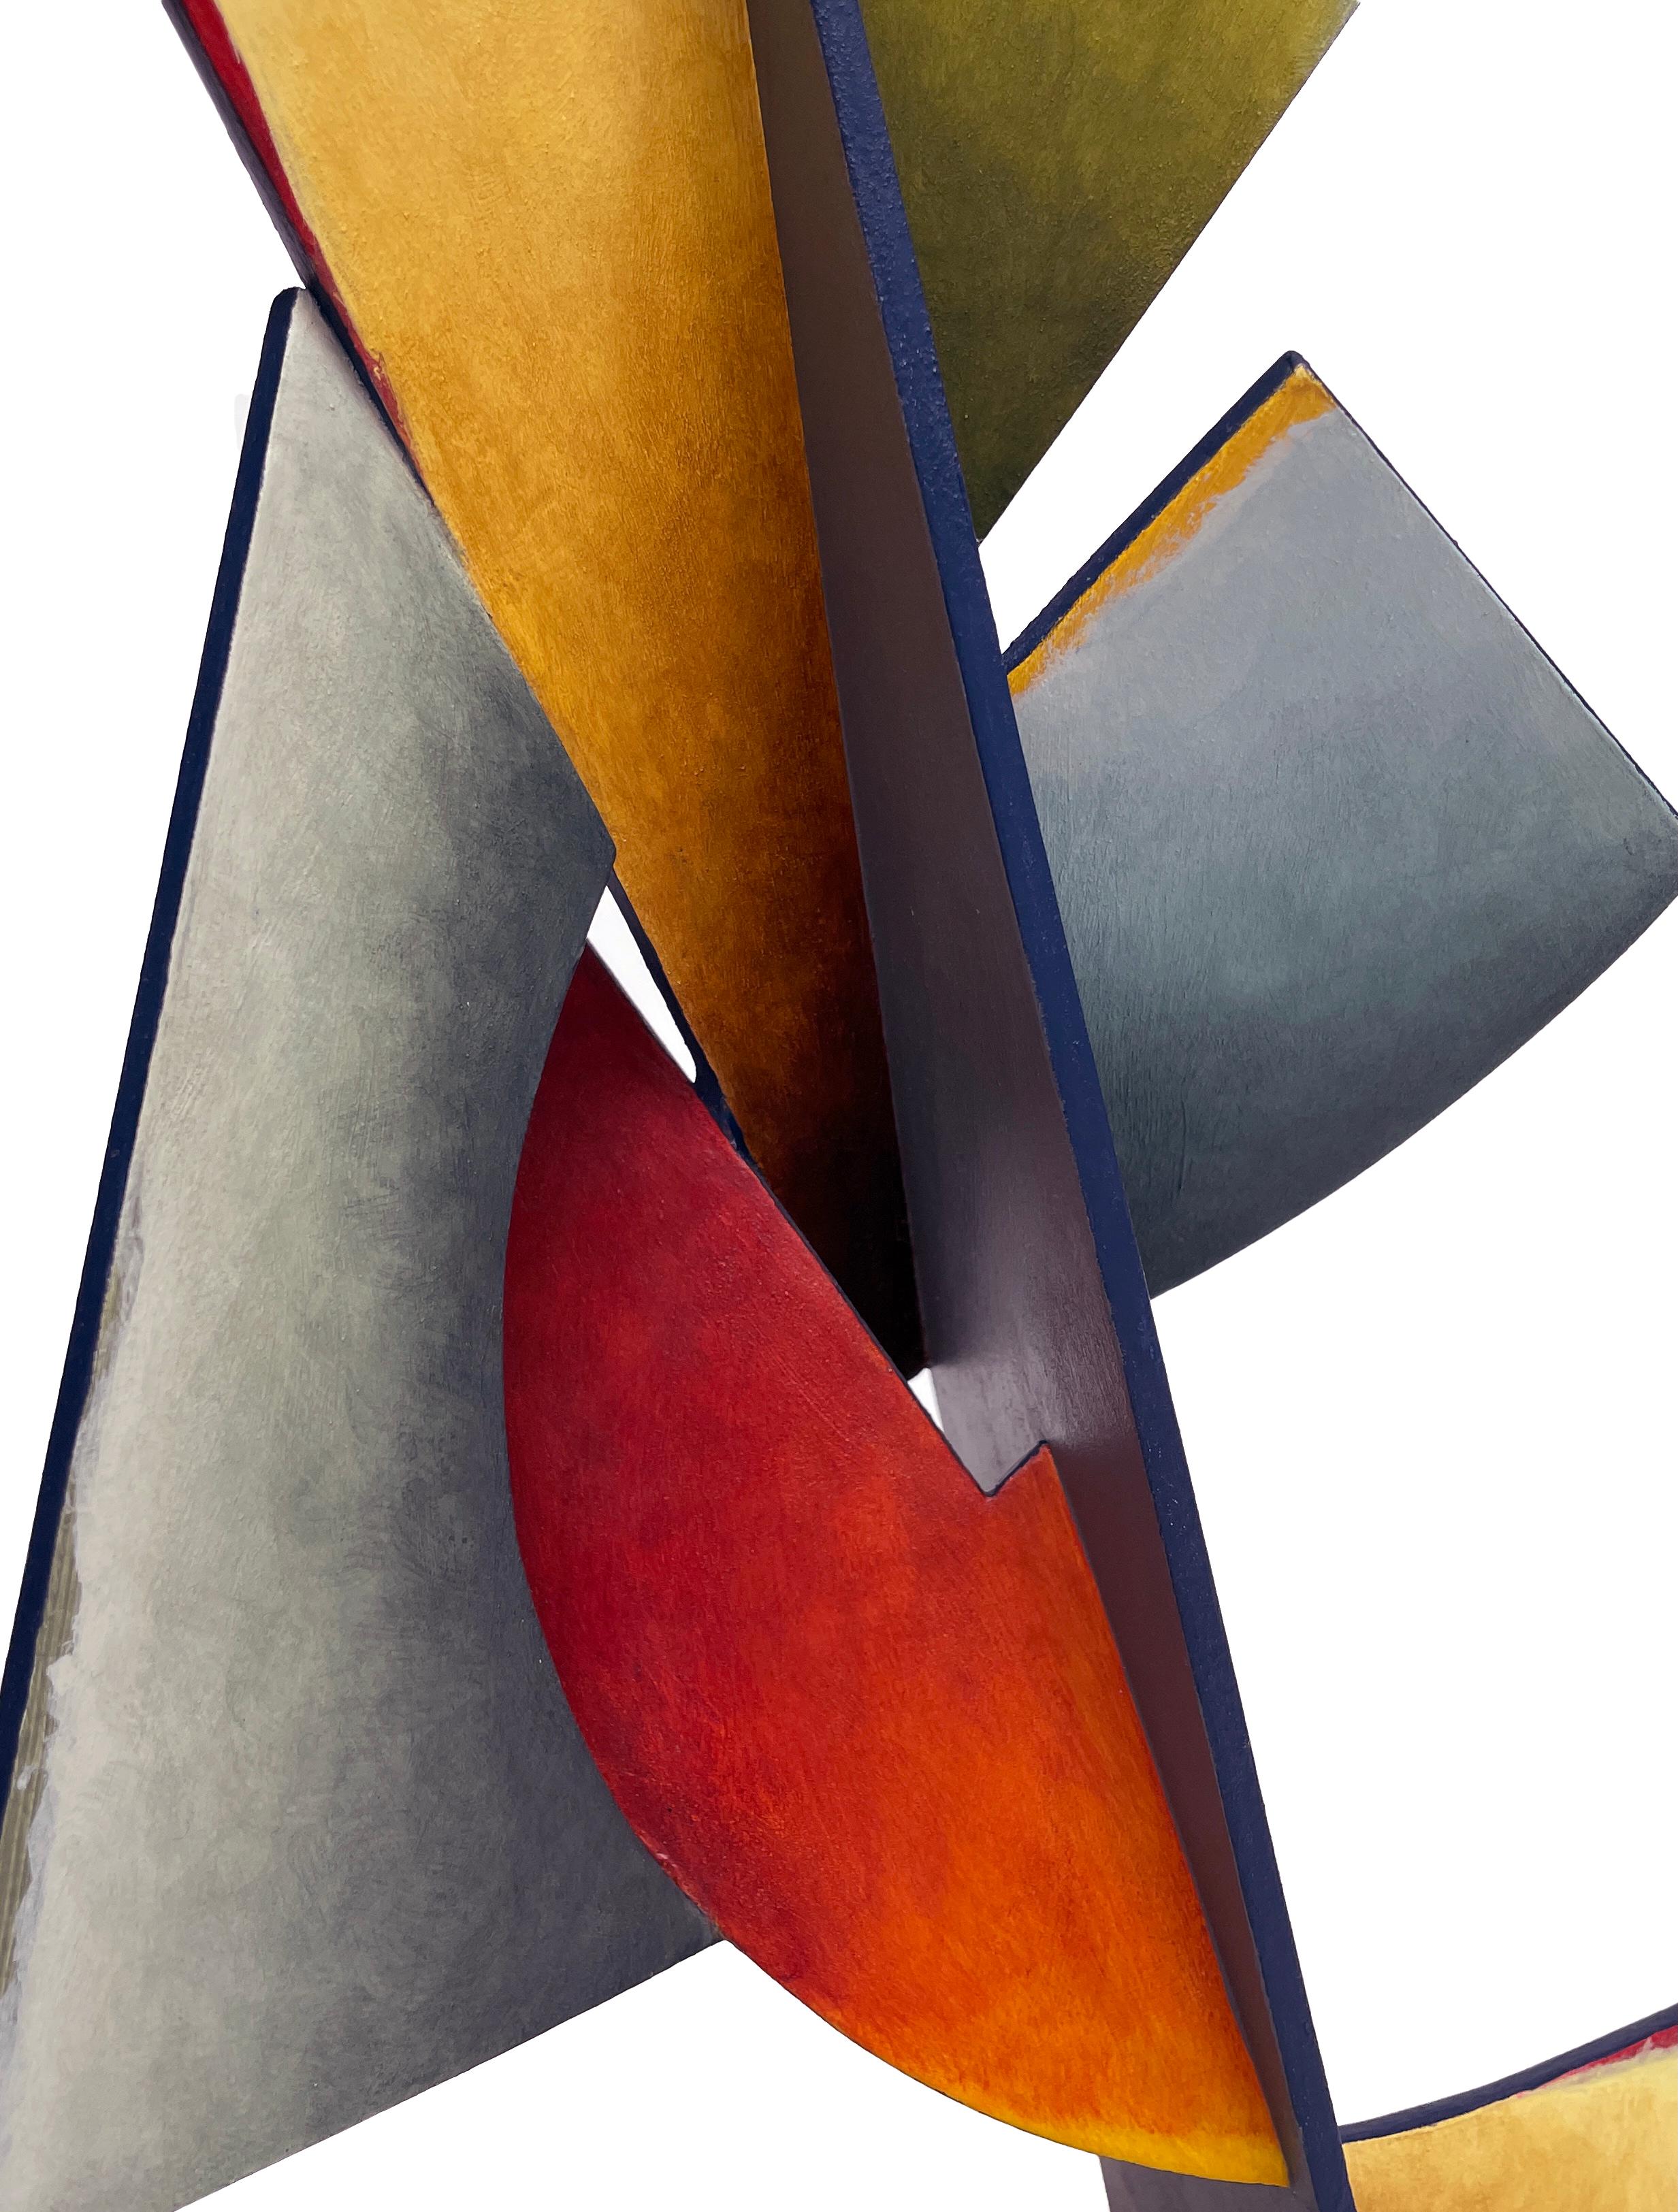 Nightfall Dreams - Abstract Geometric Form, Hand Painted Welded Steel Sculpture  4